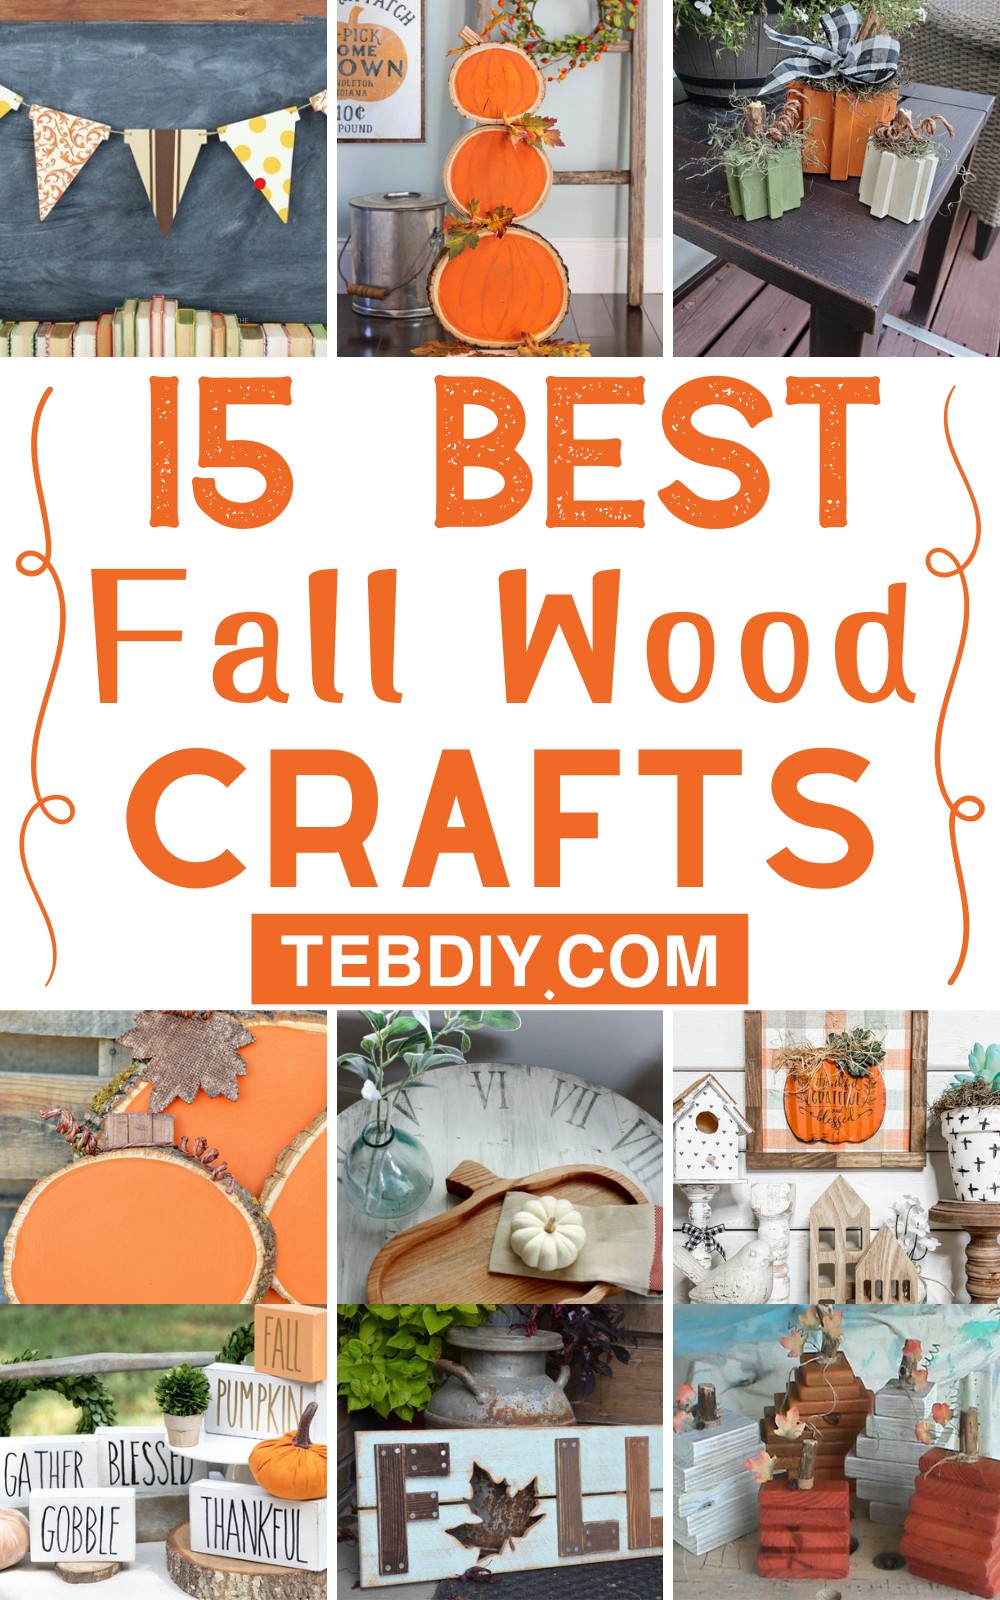 15 Best Fall Wood Crafts